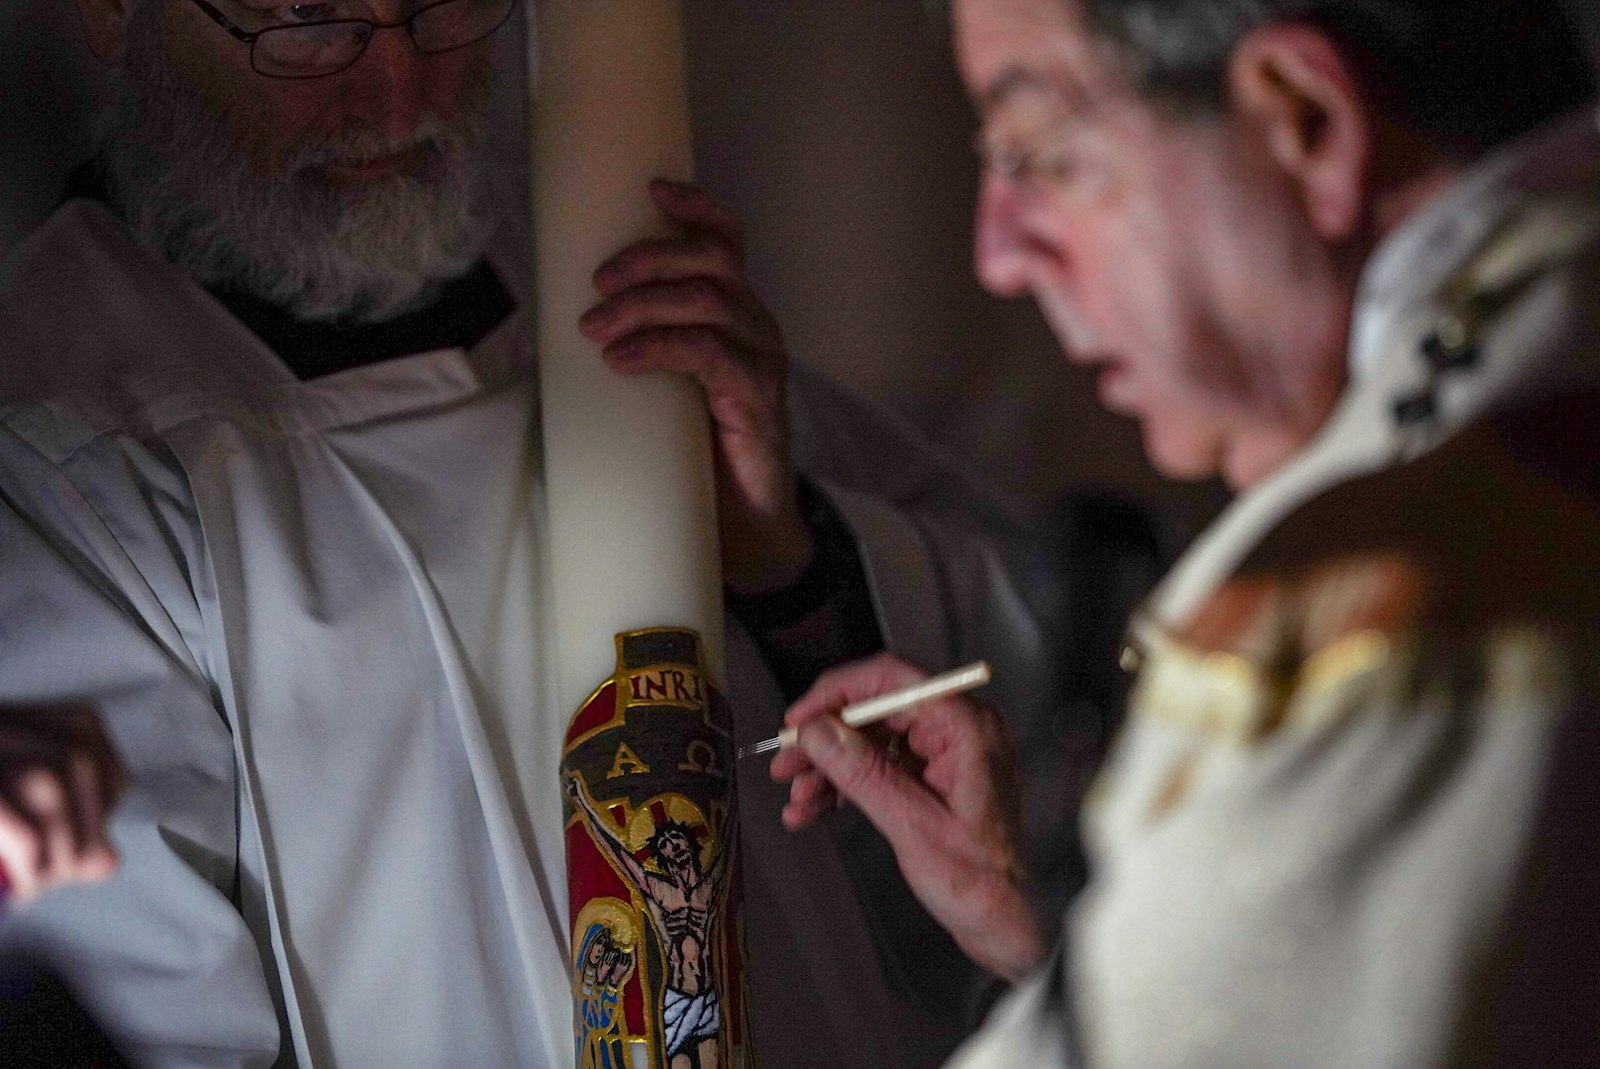 Archbishop Vigneron inscribes the Paschal candle, which represents the new light of Christ coming into the Church after the Lenten fast.